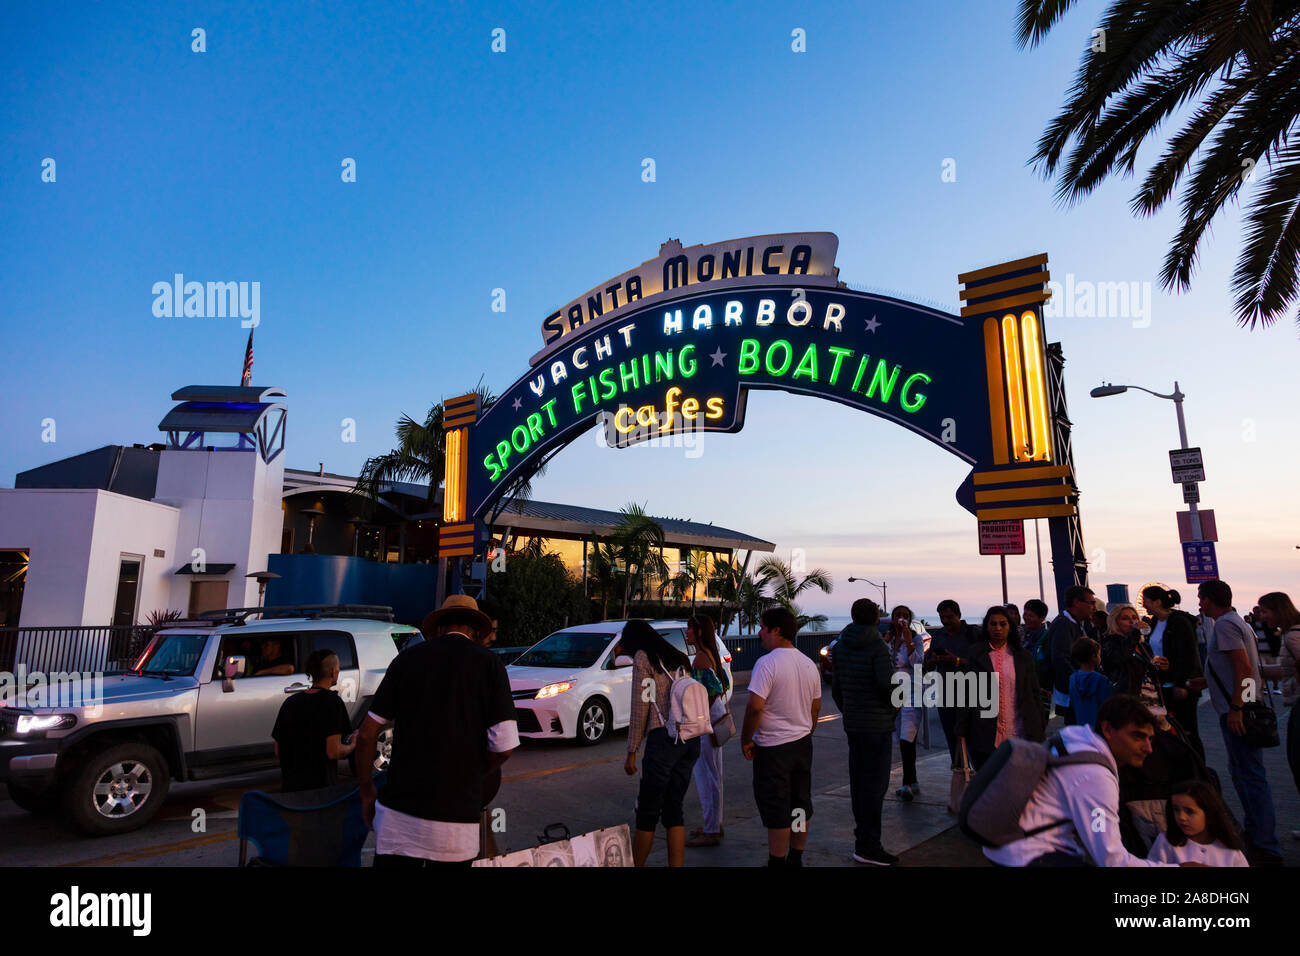 Tourists gather at the entrance sign to Santa Monica pier. Yacht harbor, sport fishing,boating and cafes.  Los Angeles County, California, United Stat Stock Photo